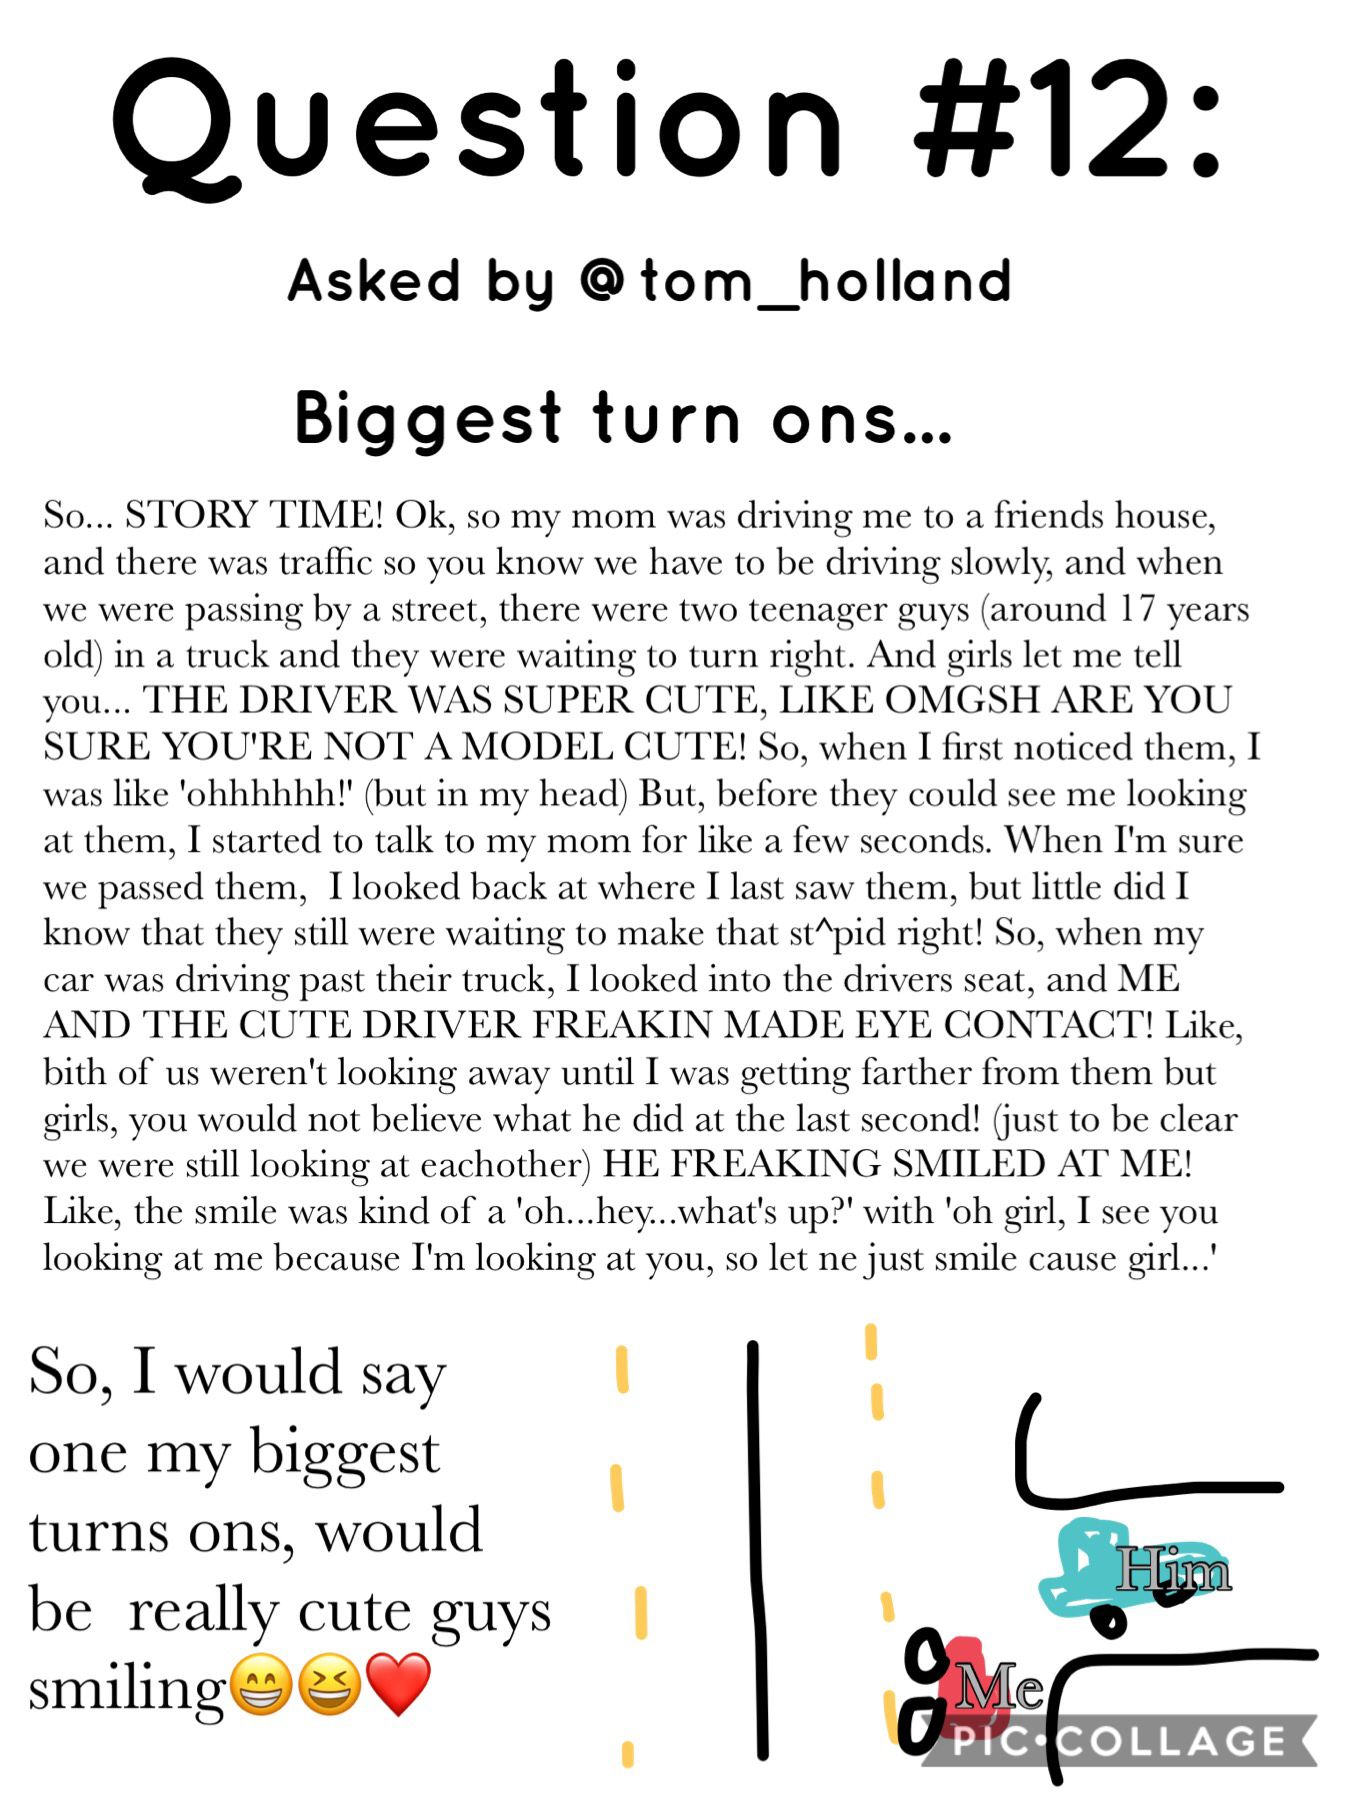 Post 78: Thanks for the question @tom_holland😃😂 Sorry guys, I know this is really long😧😂